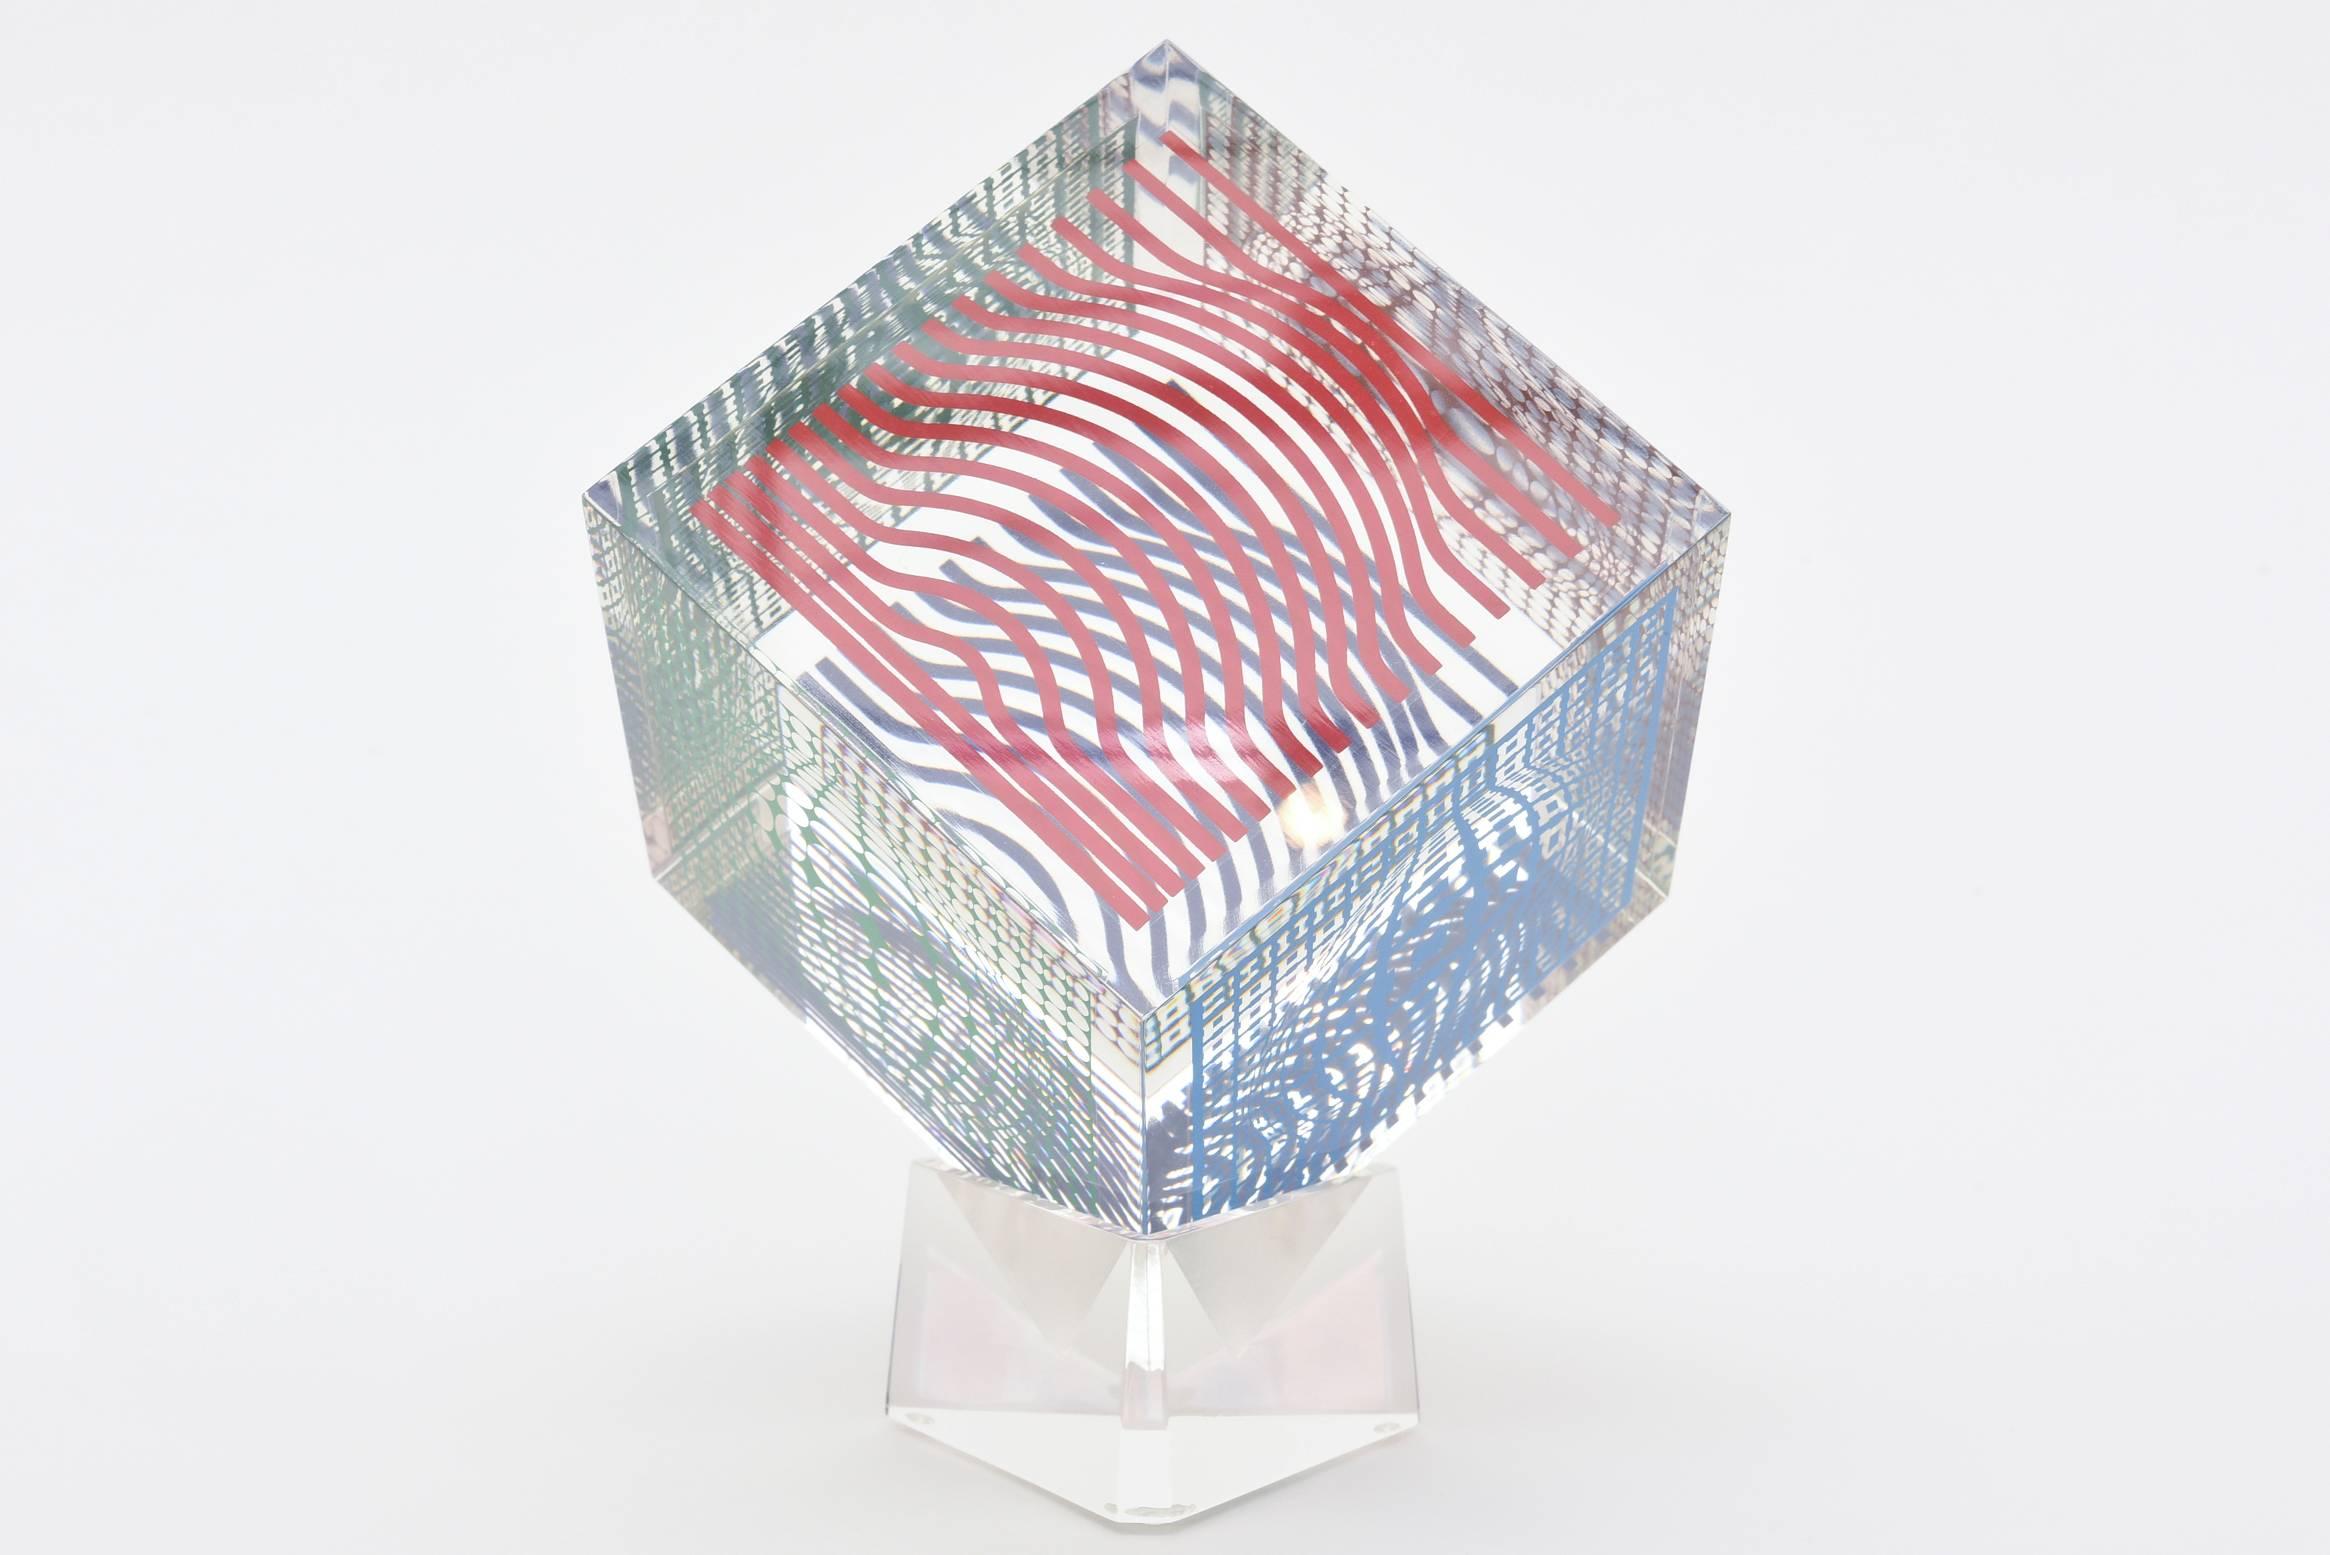 From all angles this amazing lucite op art Victor Vasarely acrylic and silkscreen cube sculpture changes graphic dynamics and images and art. It is fabulous!
Victor Vasarely was a Hungarian born artist who lived in France and died in Paris in